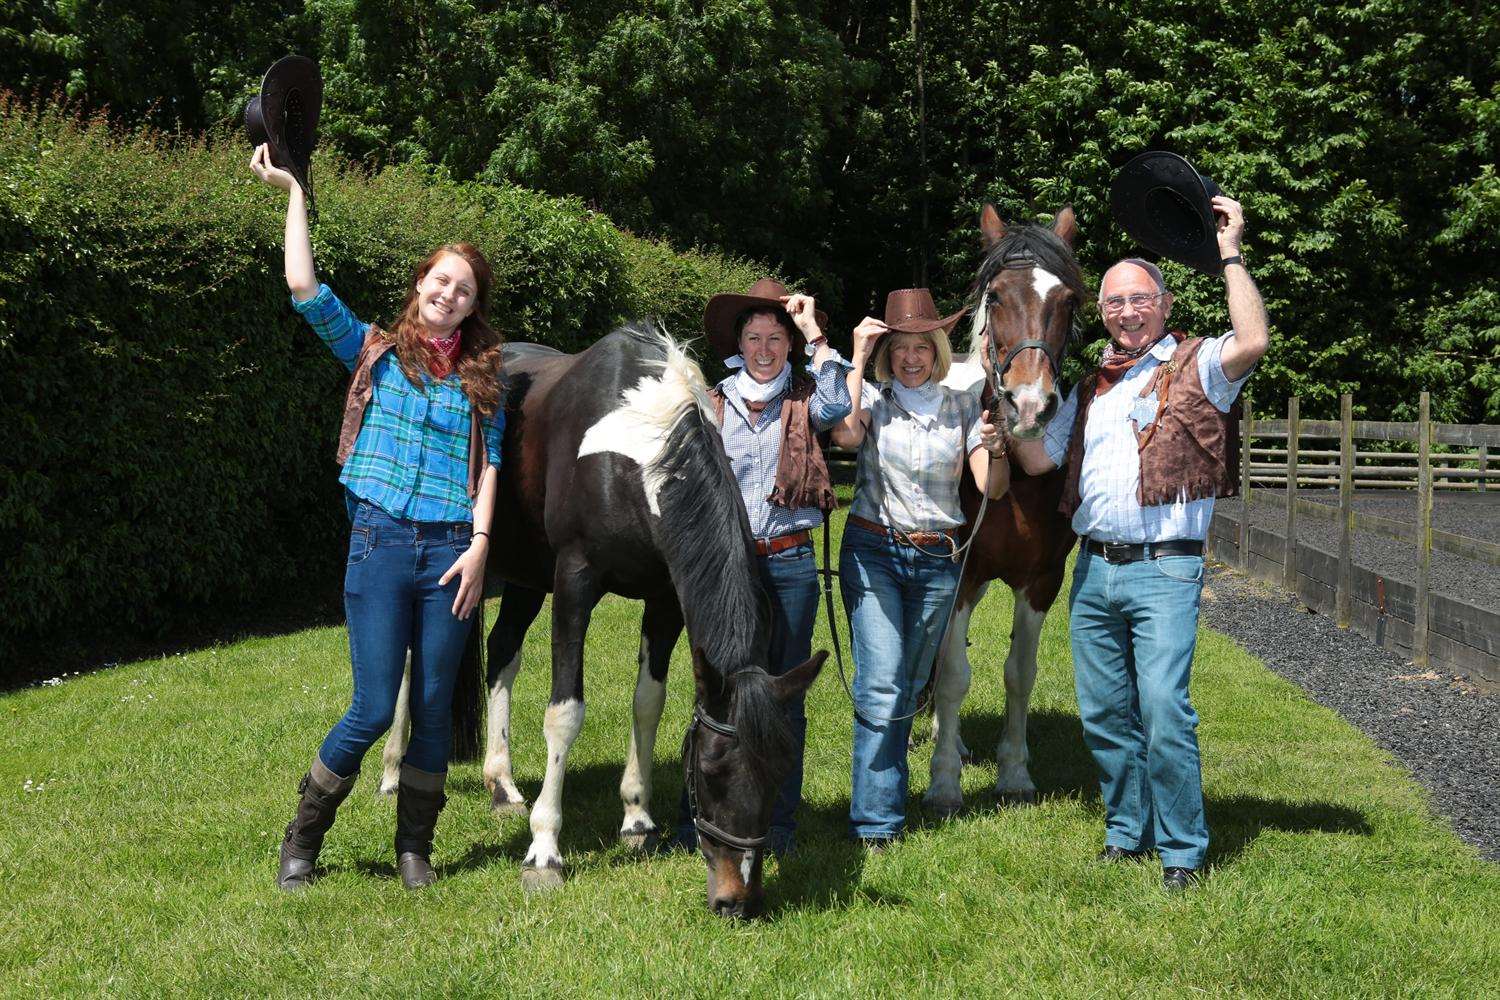 Minstral the horse and hospice volunteers get ready